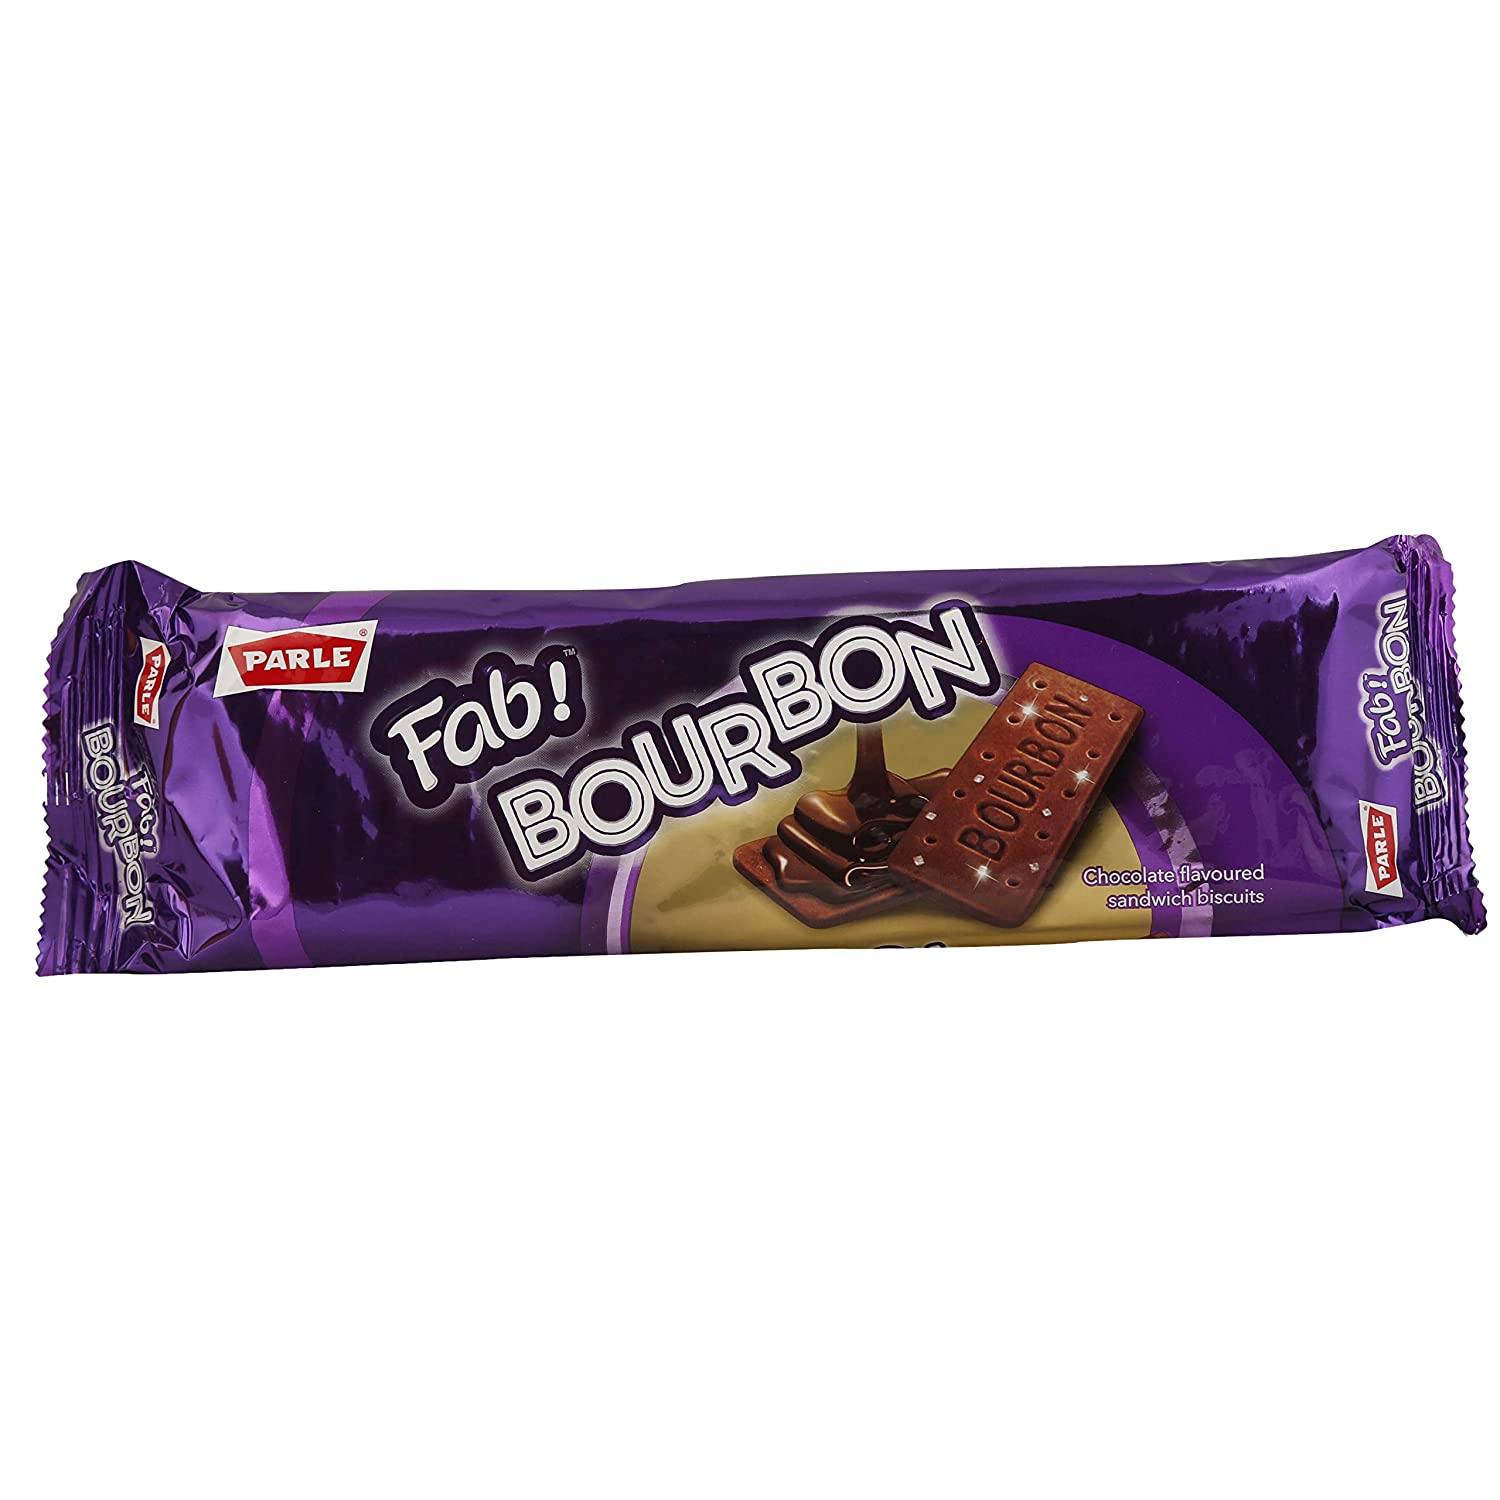 Parle Biscuits - Fab Bourbon, 150g 